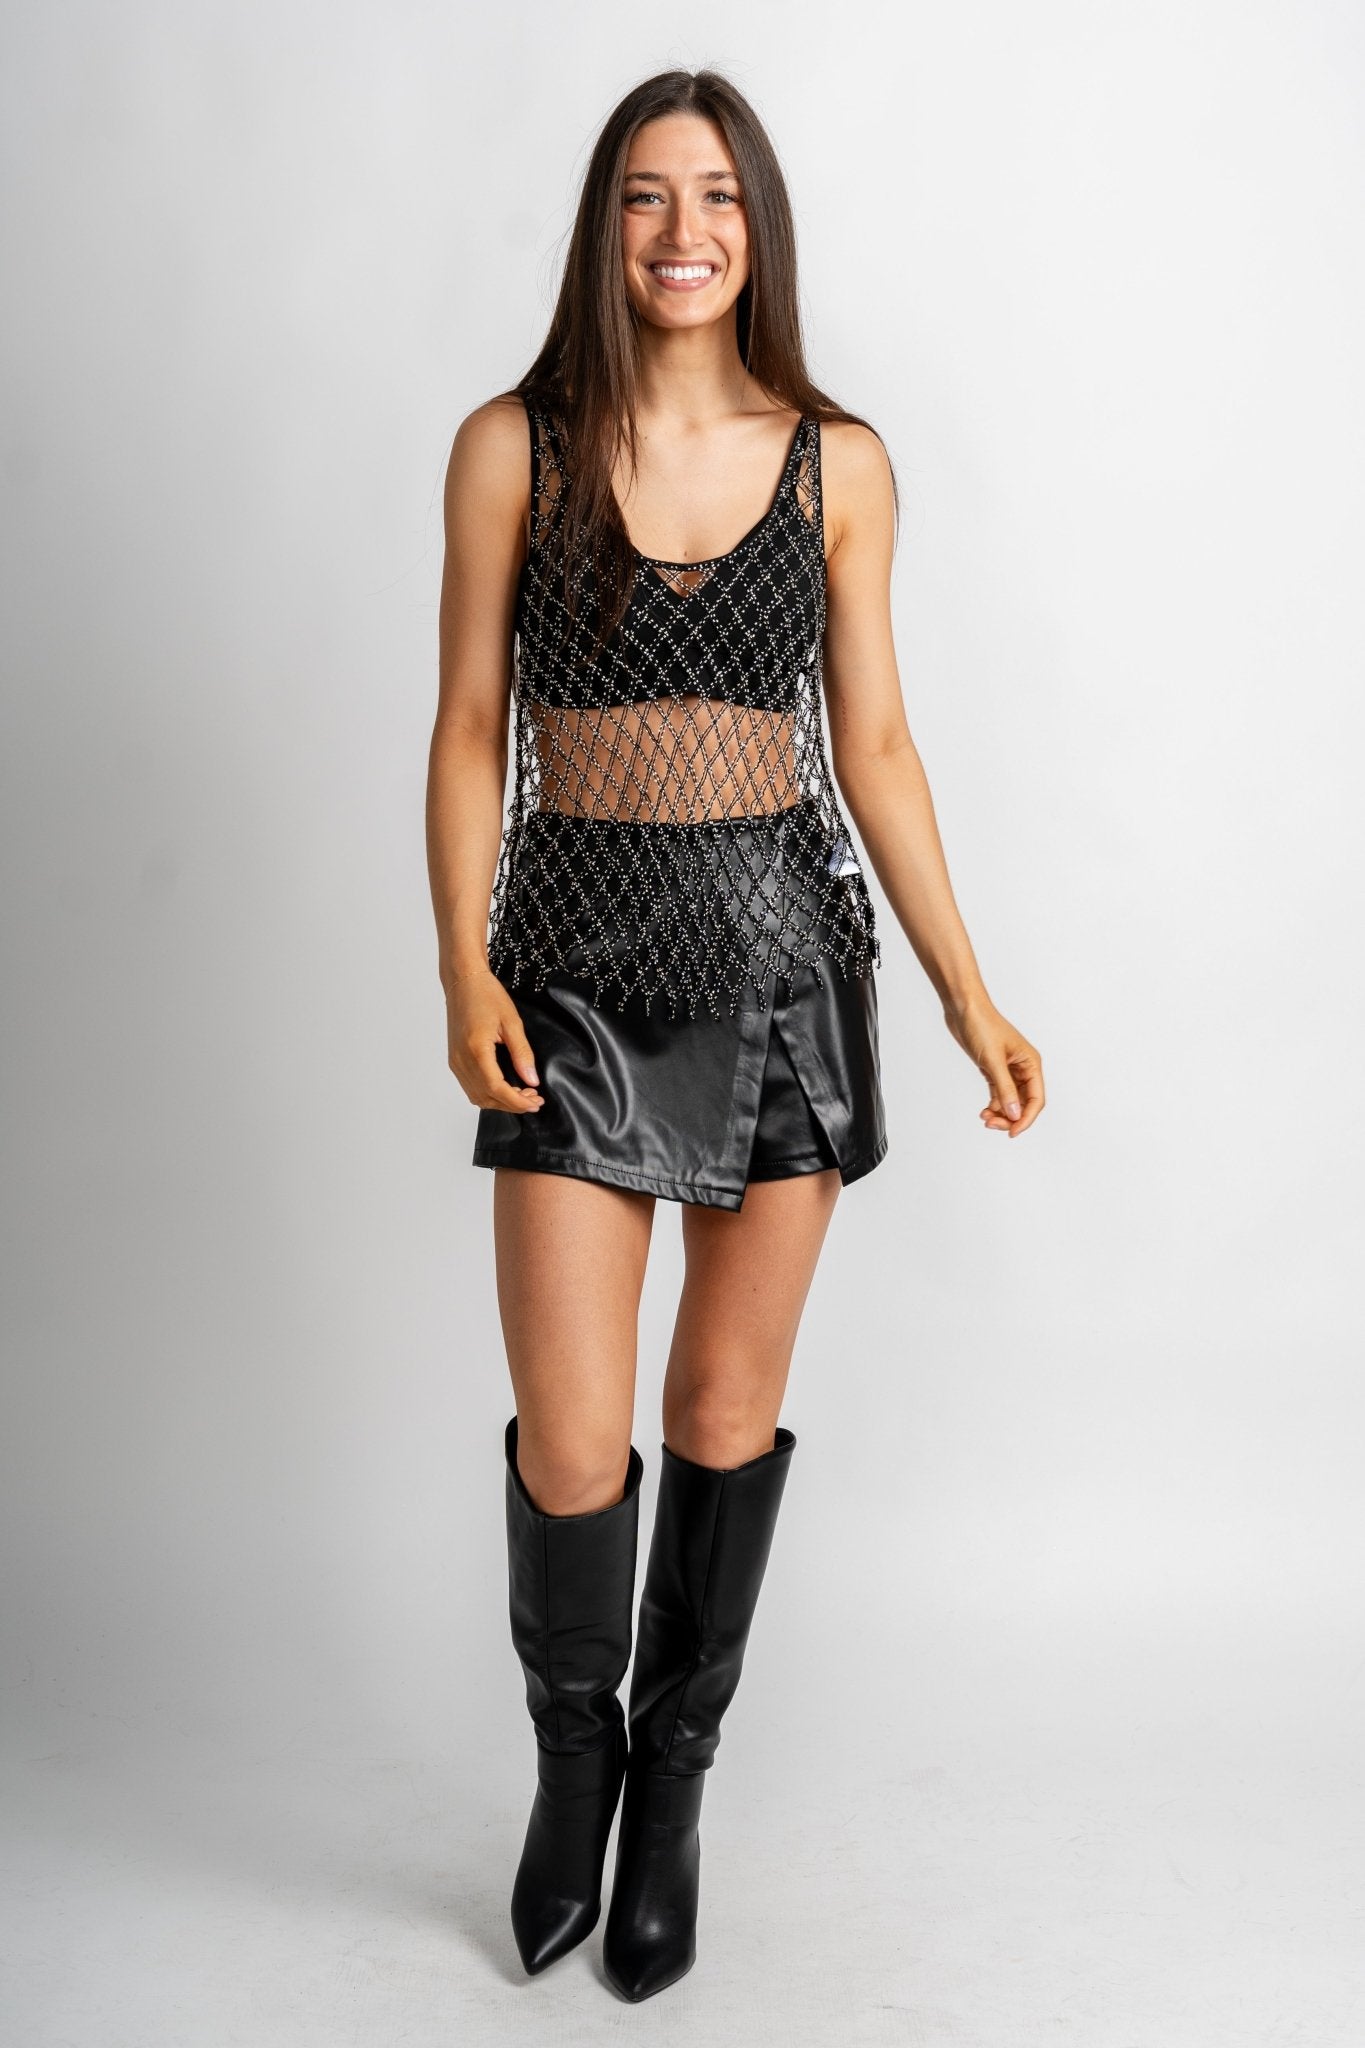 Rhinestone mesh tank top black - Affordable New Year's Eve Party Outfits at Lush Fashion Lounge Boutique in Oklahoma City